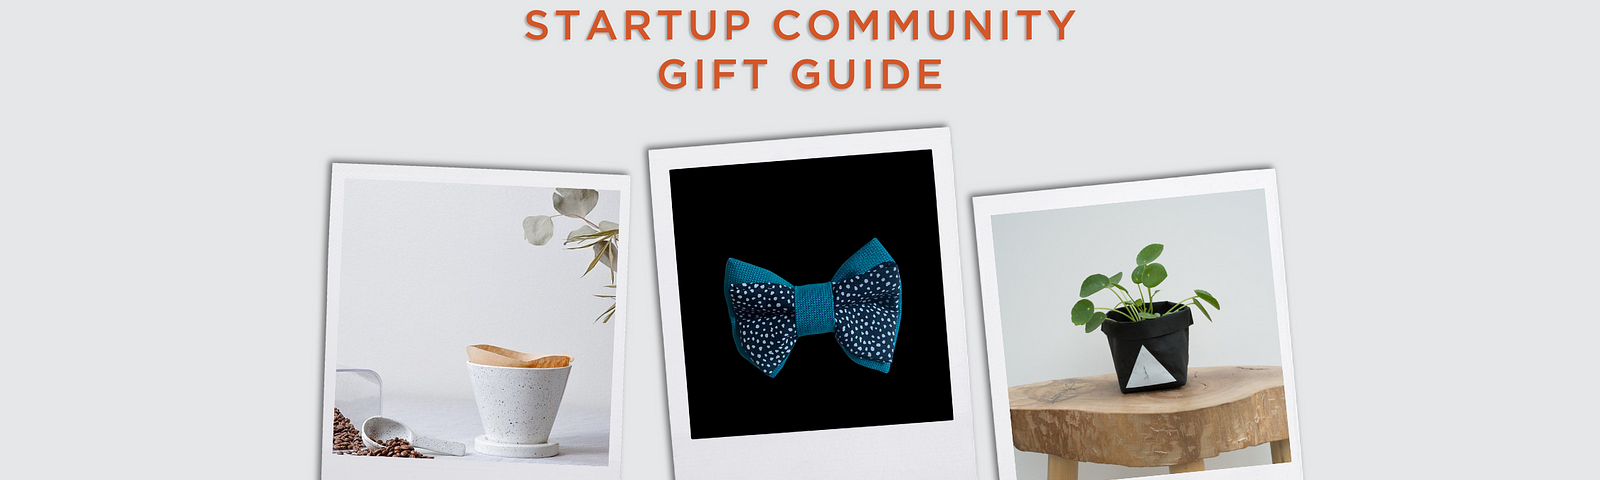 Pittsburgh Startup Community Gift Guide